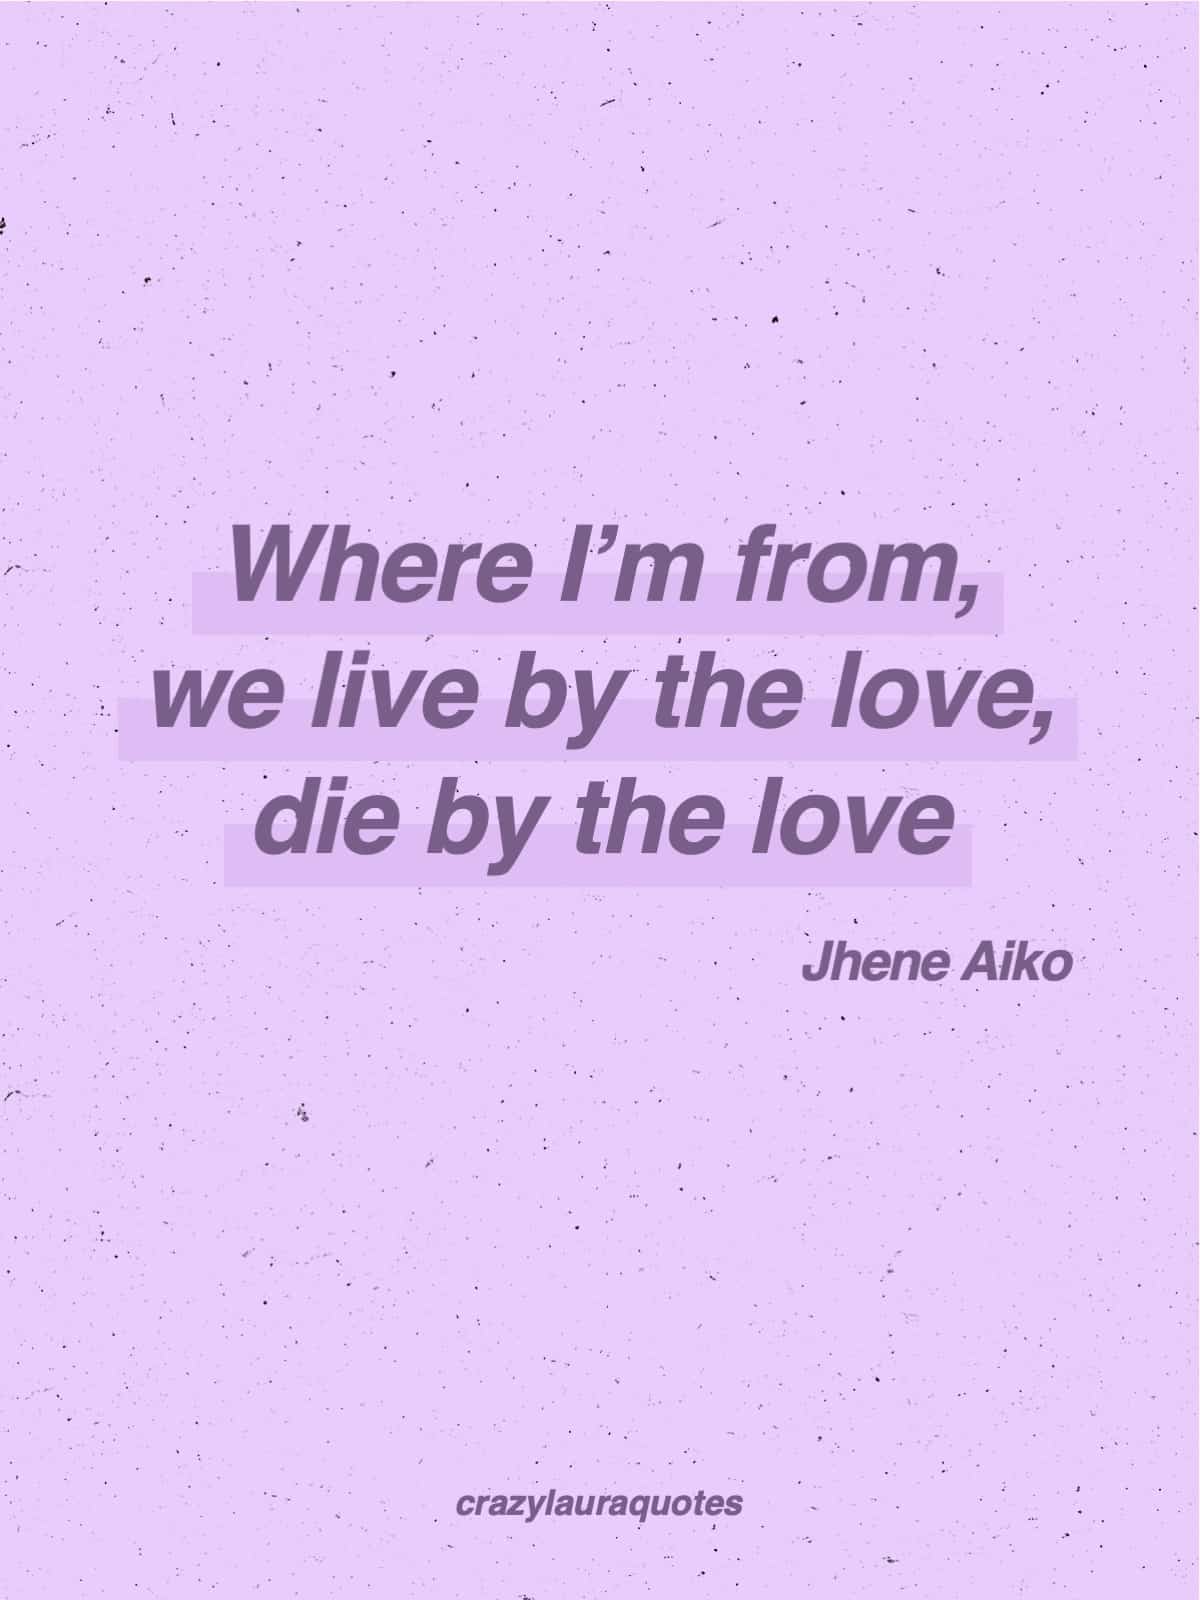 best jhene aiko song lyric about love